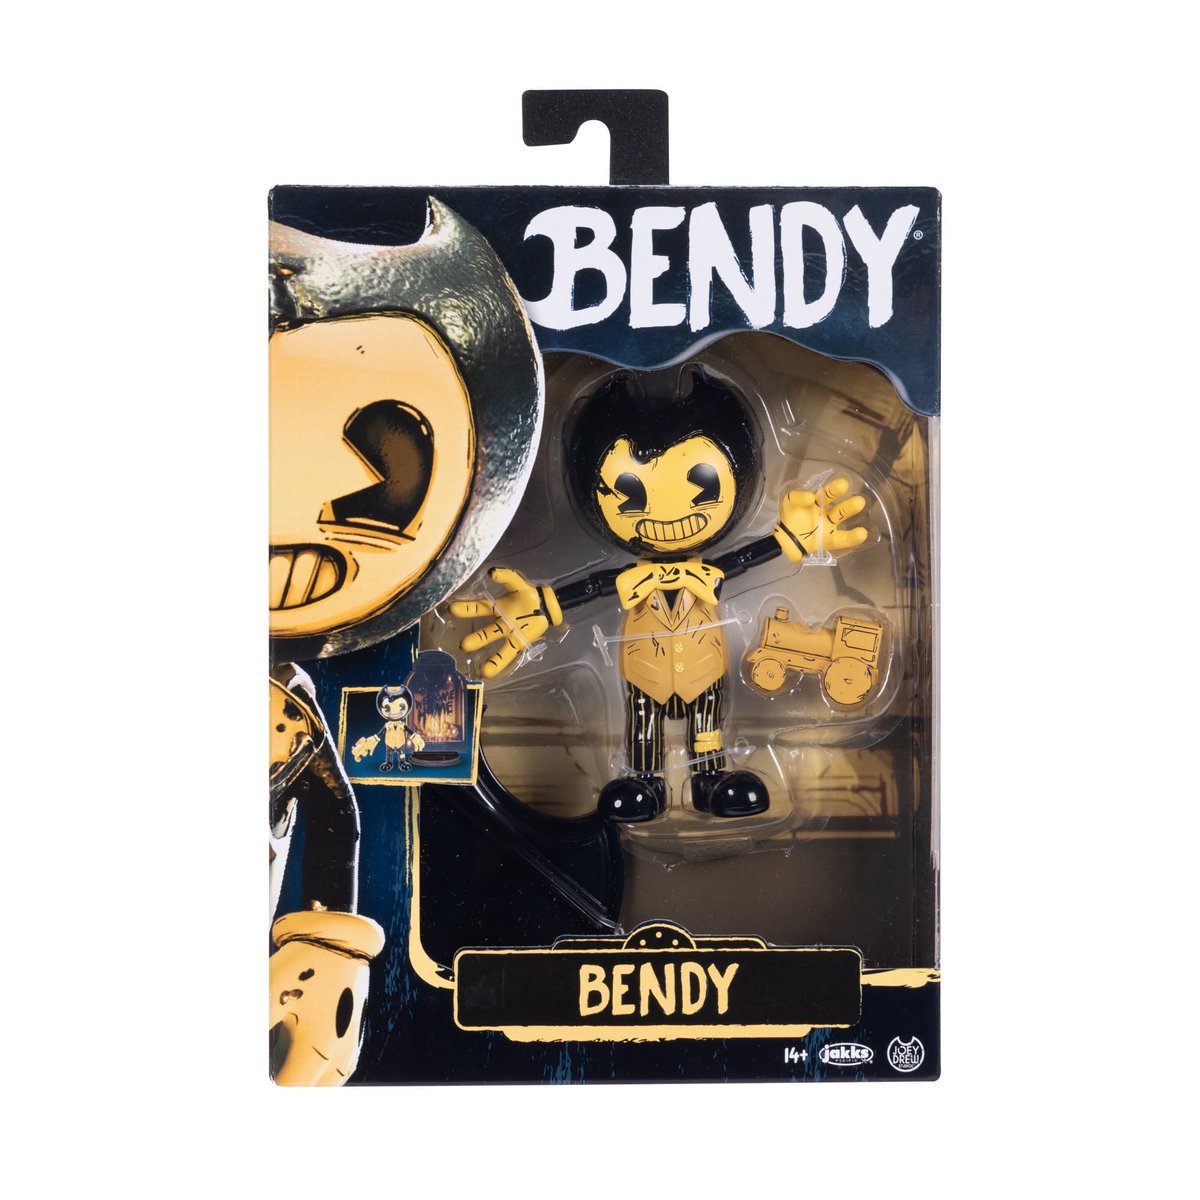 Yo FNaF…

You should do what Bendy is doing and get a good figure company to make merch of your characters. Jakks or literally anything